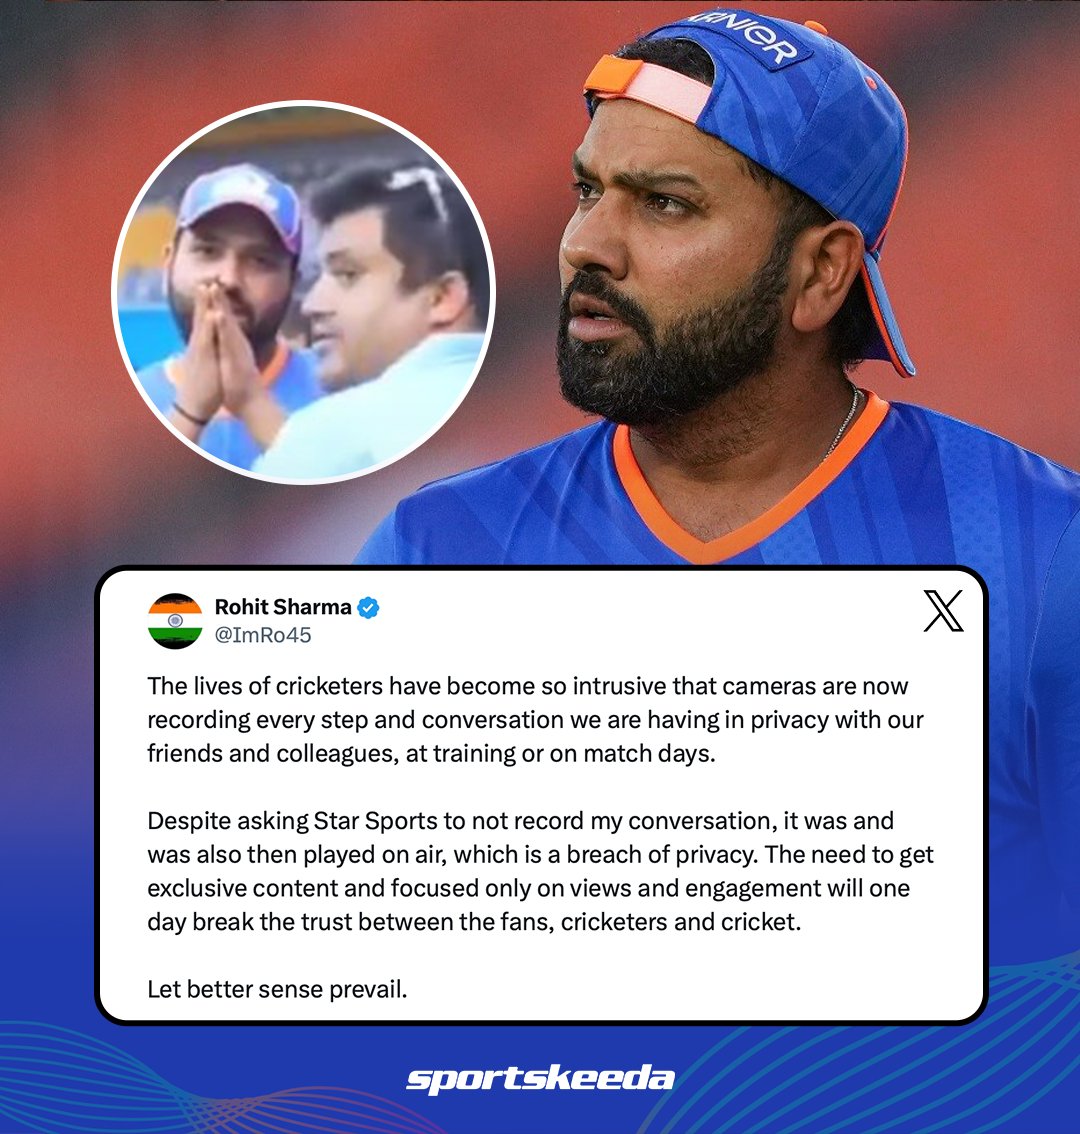 Rohit Sharma criticizes Star Sports for recording his conversation despite his request not to do so 👀 #IPL2024 #RohitSharma #CricketTwitter